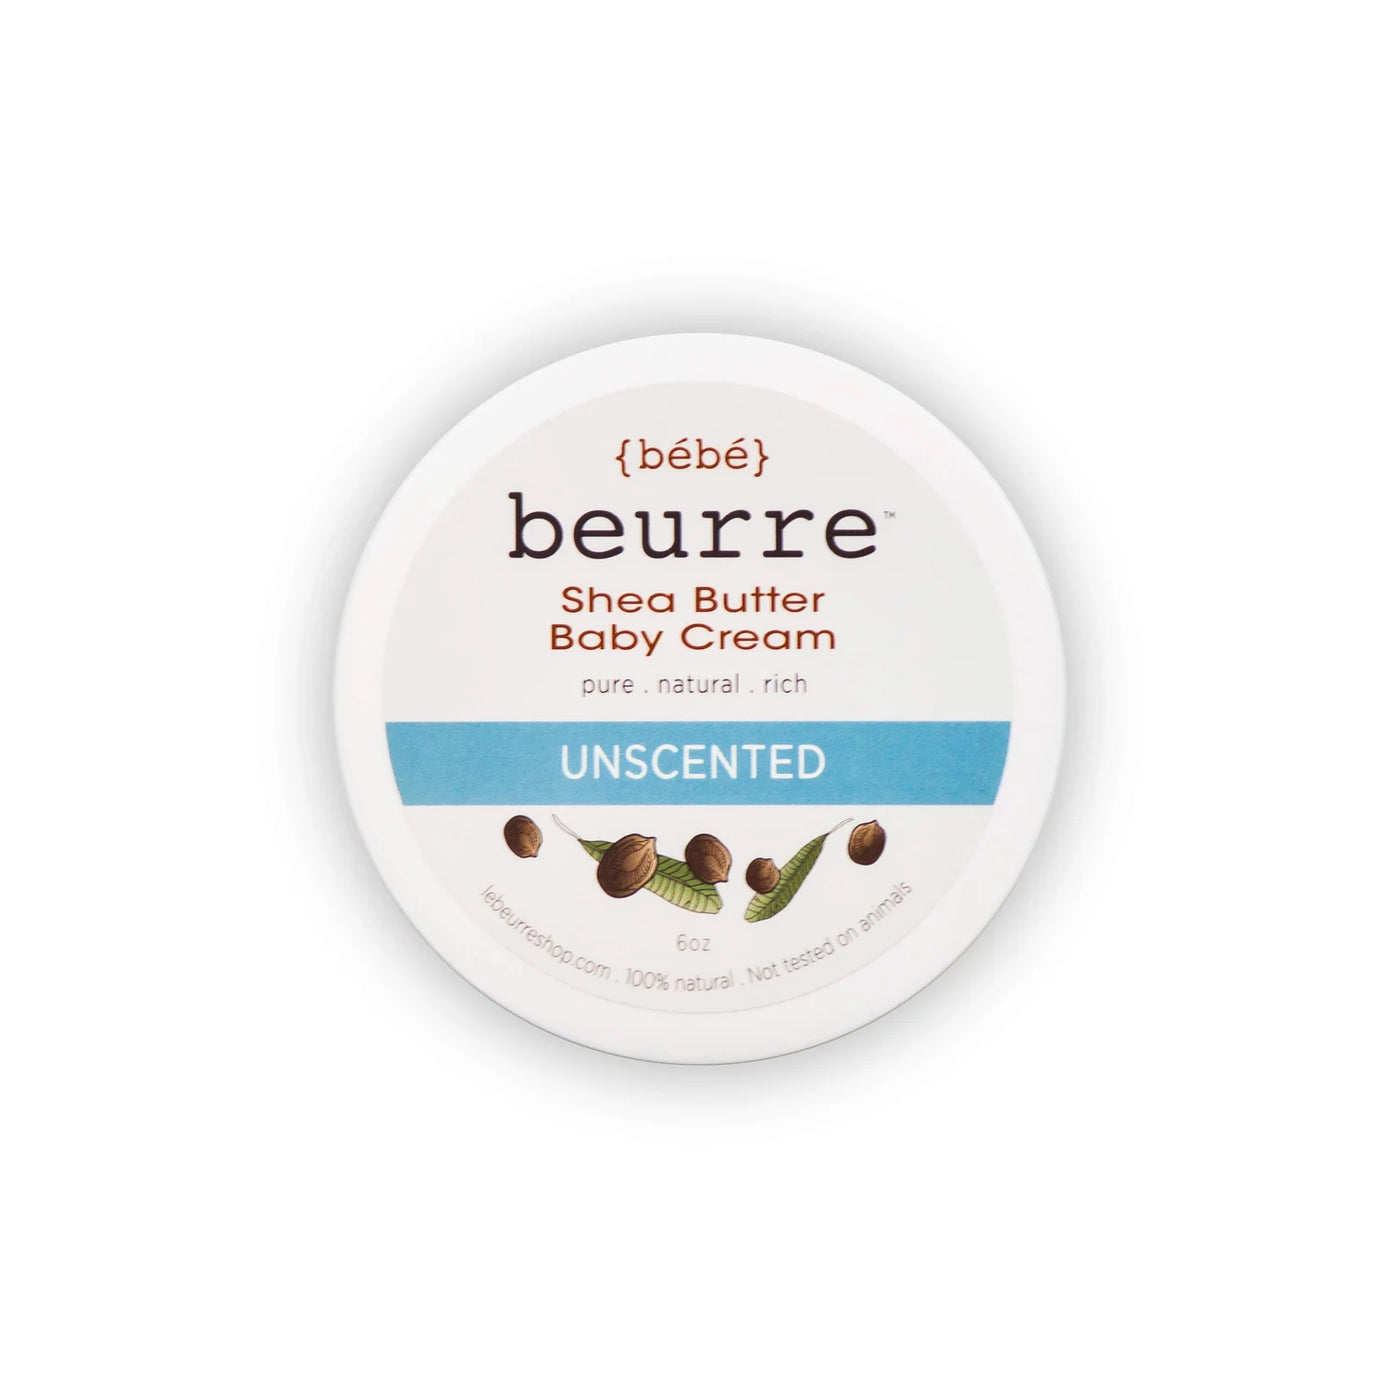 Le Beurre Shea Butter Baby Cream